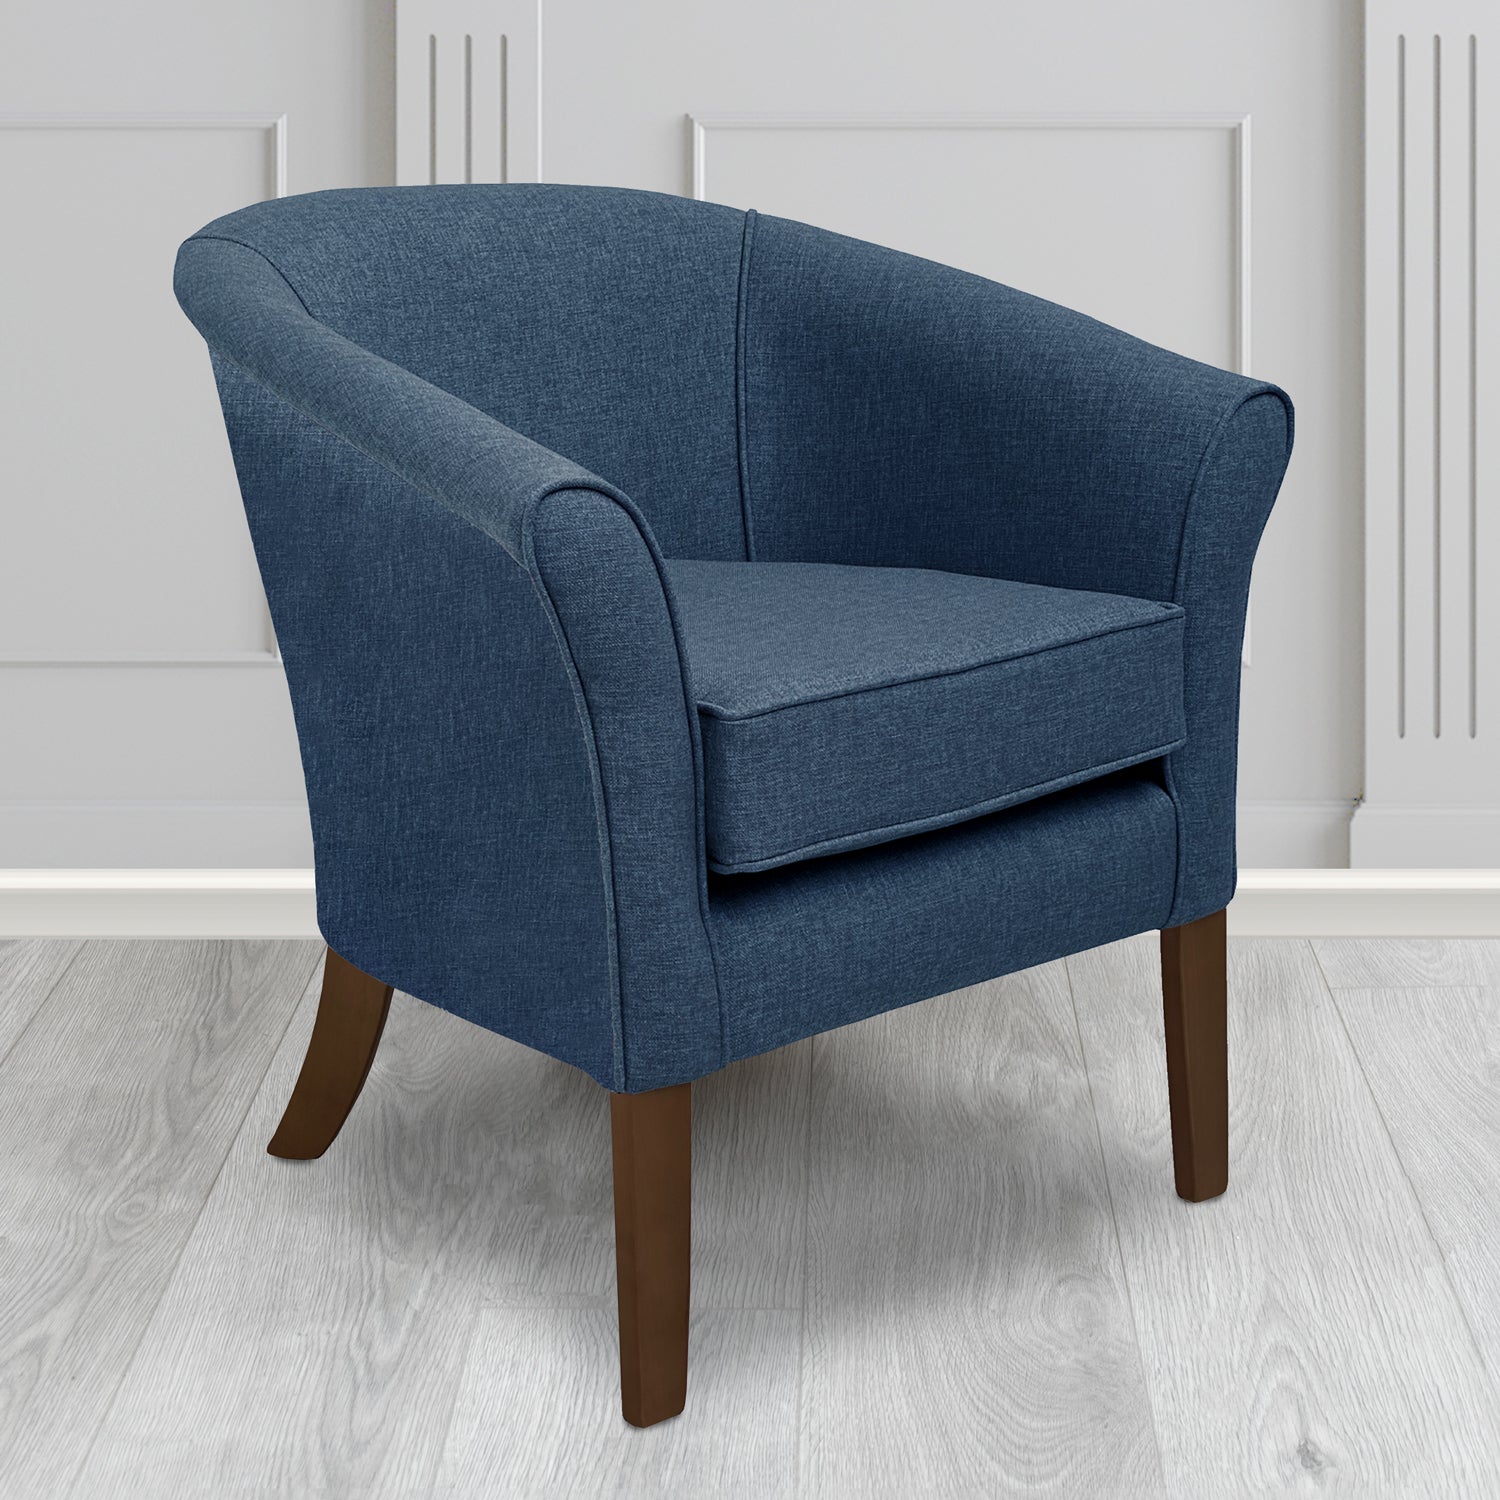 Aspen Tub Chair in Marna 105 Indigo Crib 5 Fabric - Antimicrobial, Stain Resistant & Waterproof - The Tub Chair Shop